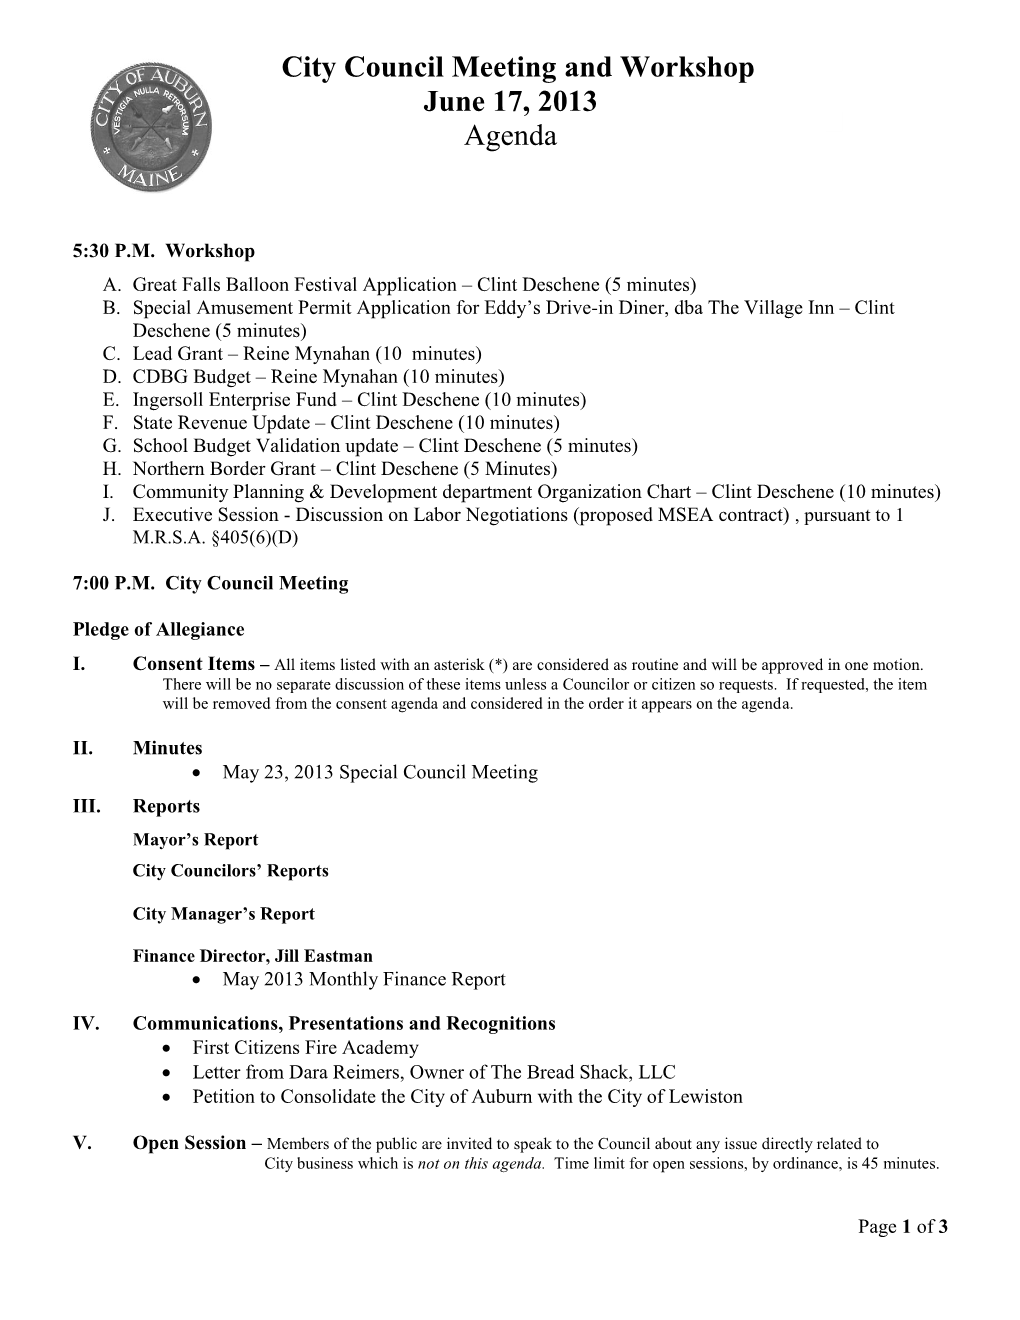 City Council Meeting and Workshop June 17, 2013 Agenda